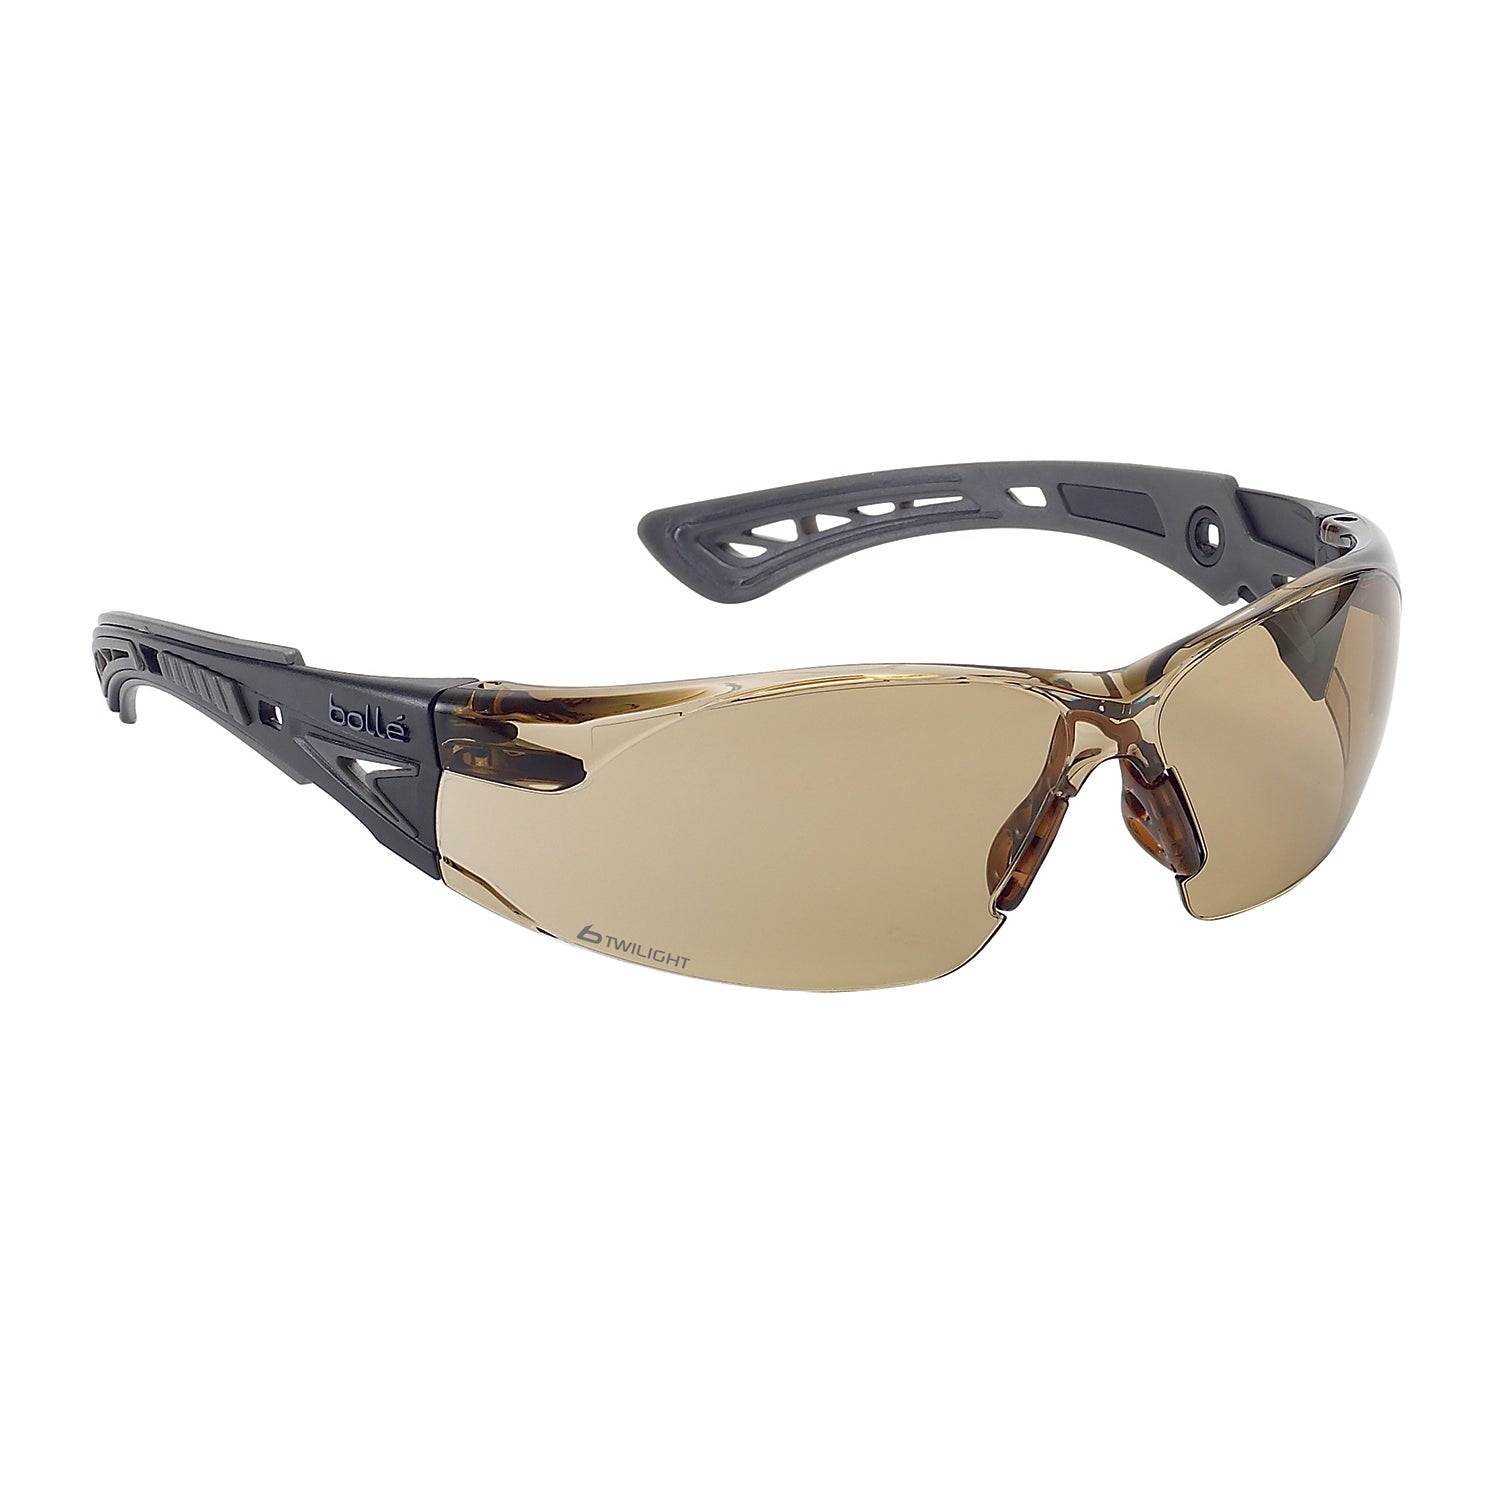 bolle Safety glasses -  bolle safety spectacles twilight Lens